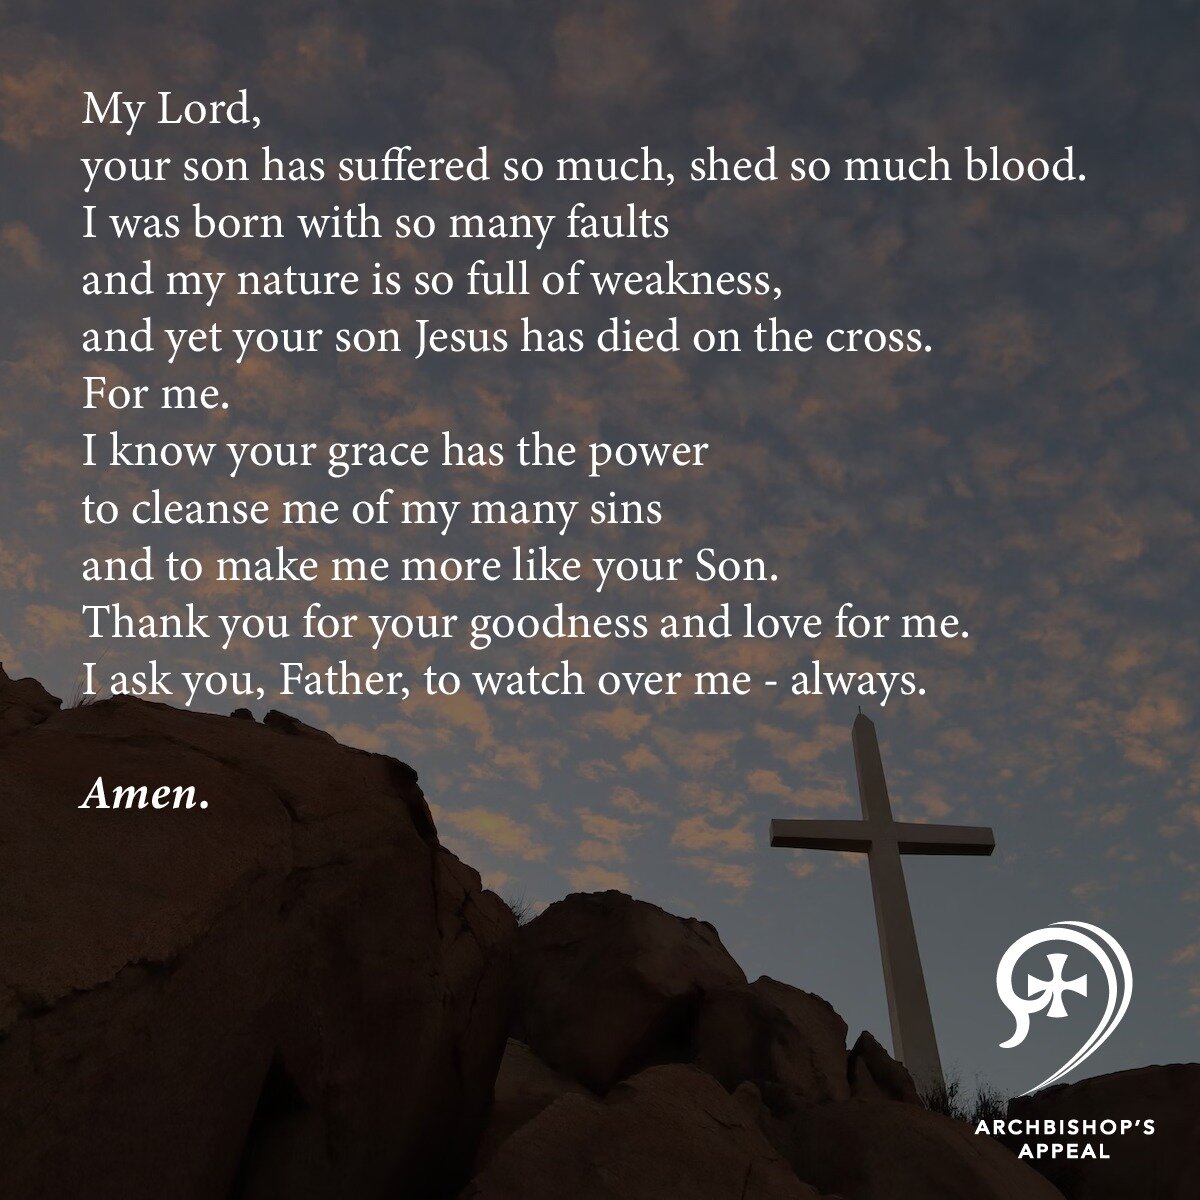 My Lord,
your son has suffered so much, shed so much blood.
I was born with so many faults
and my nature is so full of weakness,
and yet your son Jesus has died on the cross.
For me.
I know your grace has the power
to cleanse me of my many sins
and t